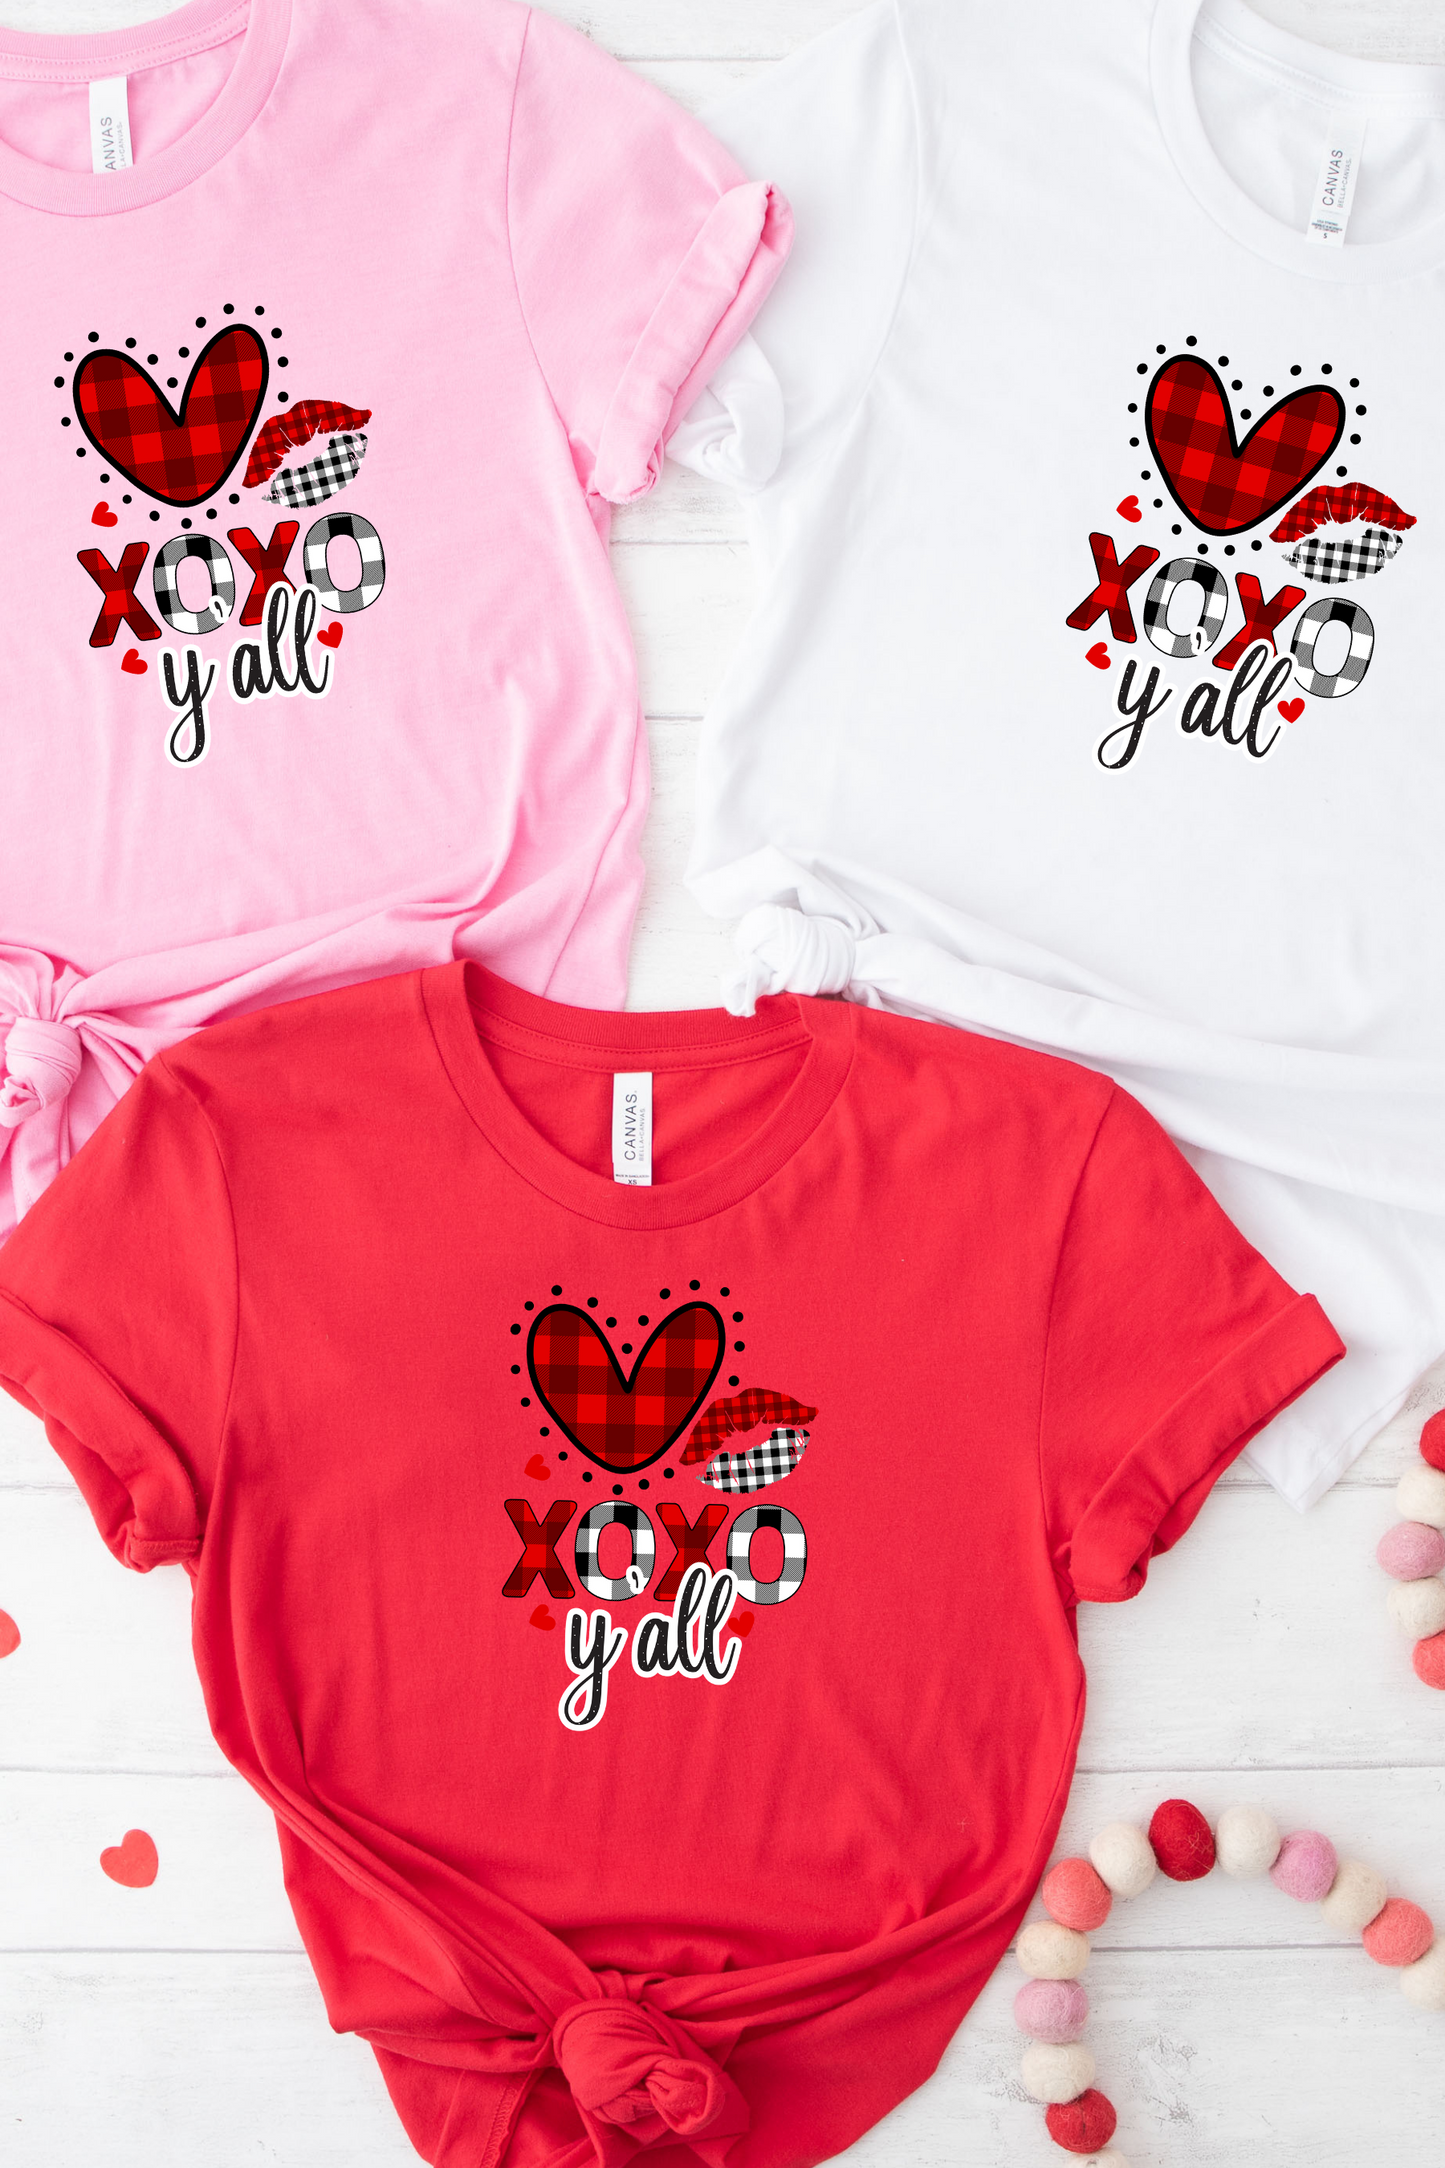 XOXO Y'all Valentine's Day Graphic Tee